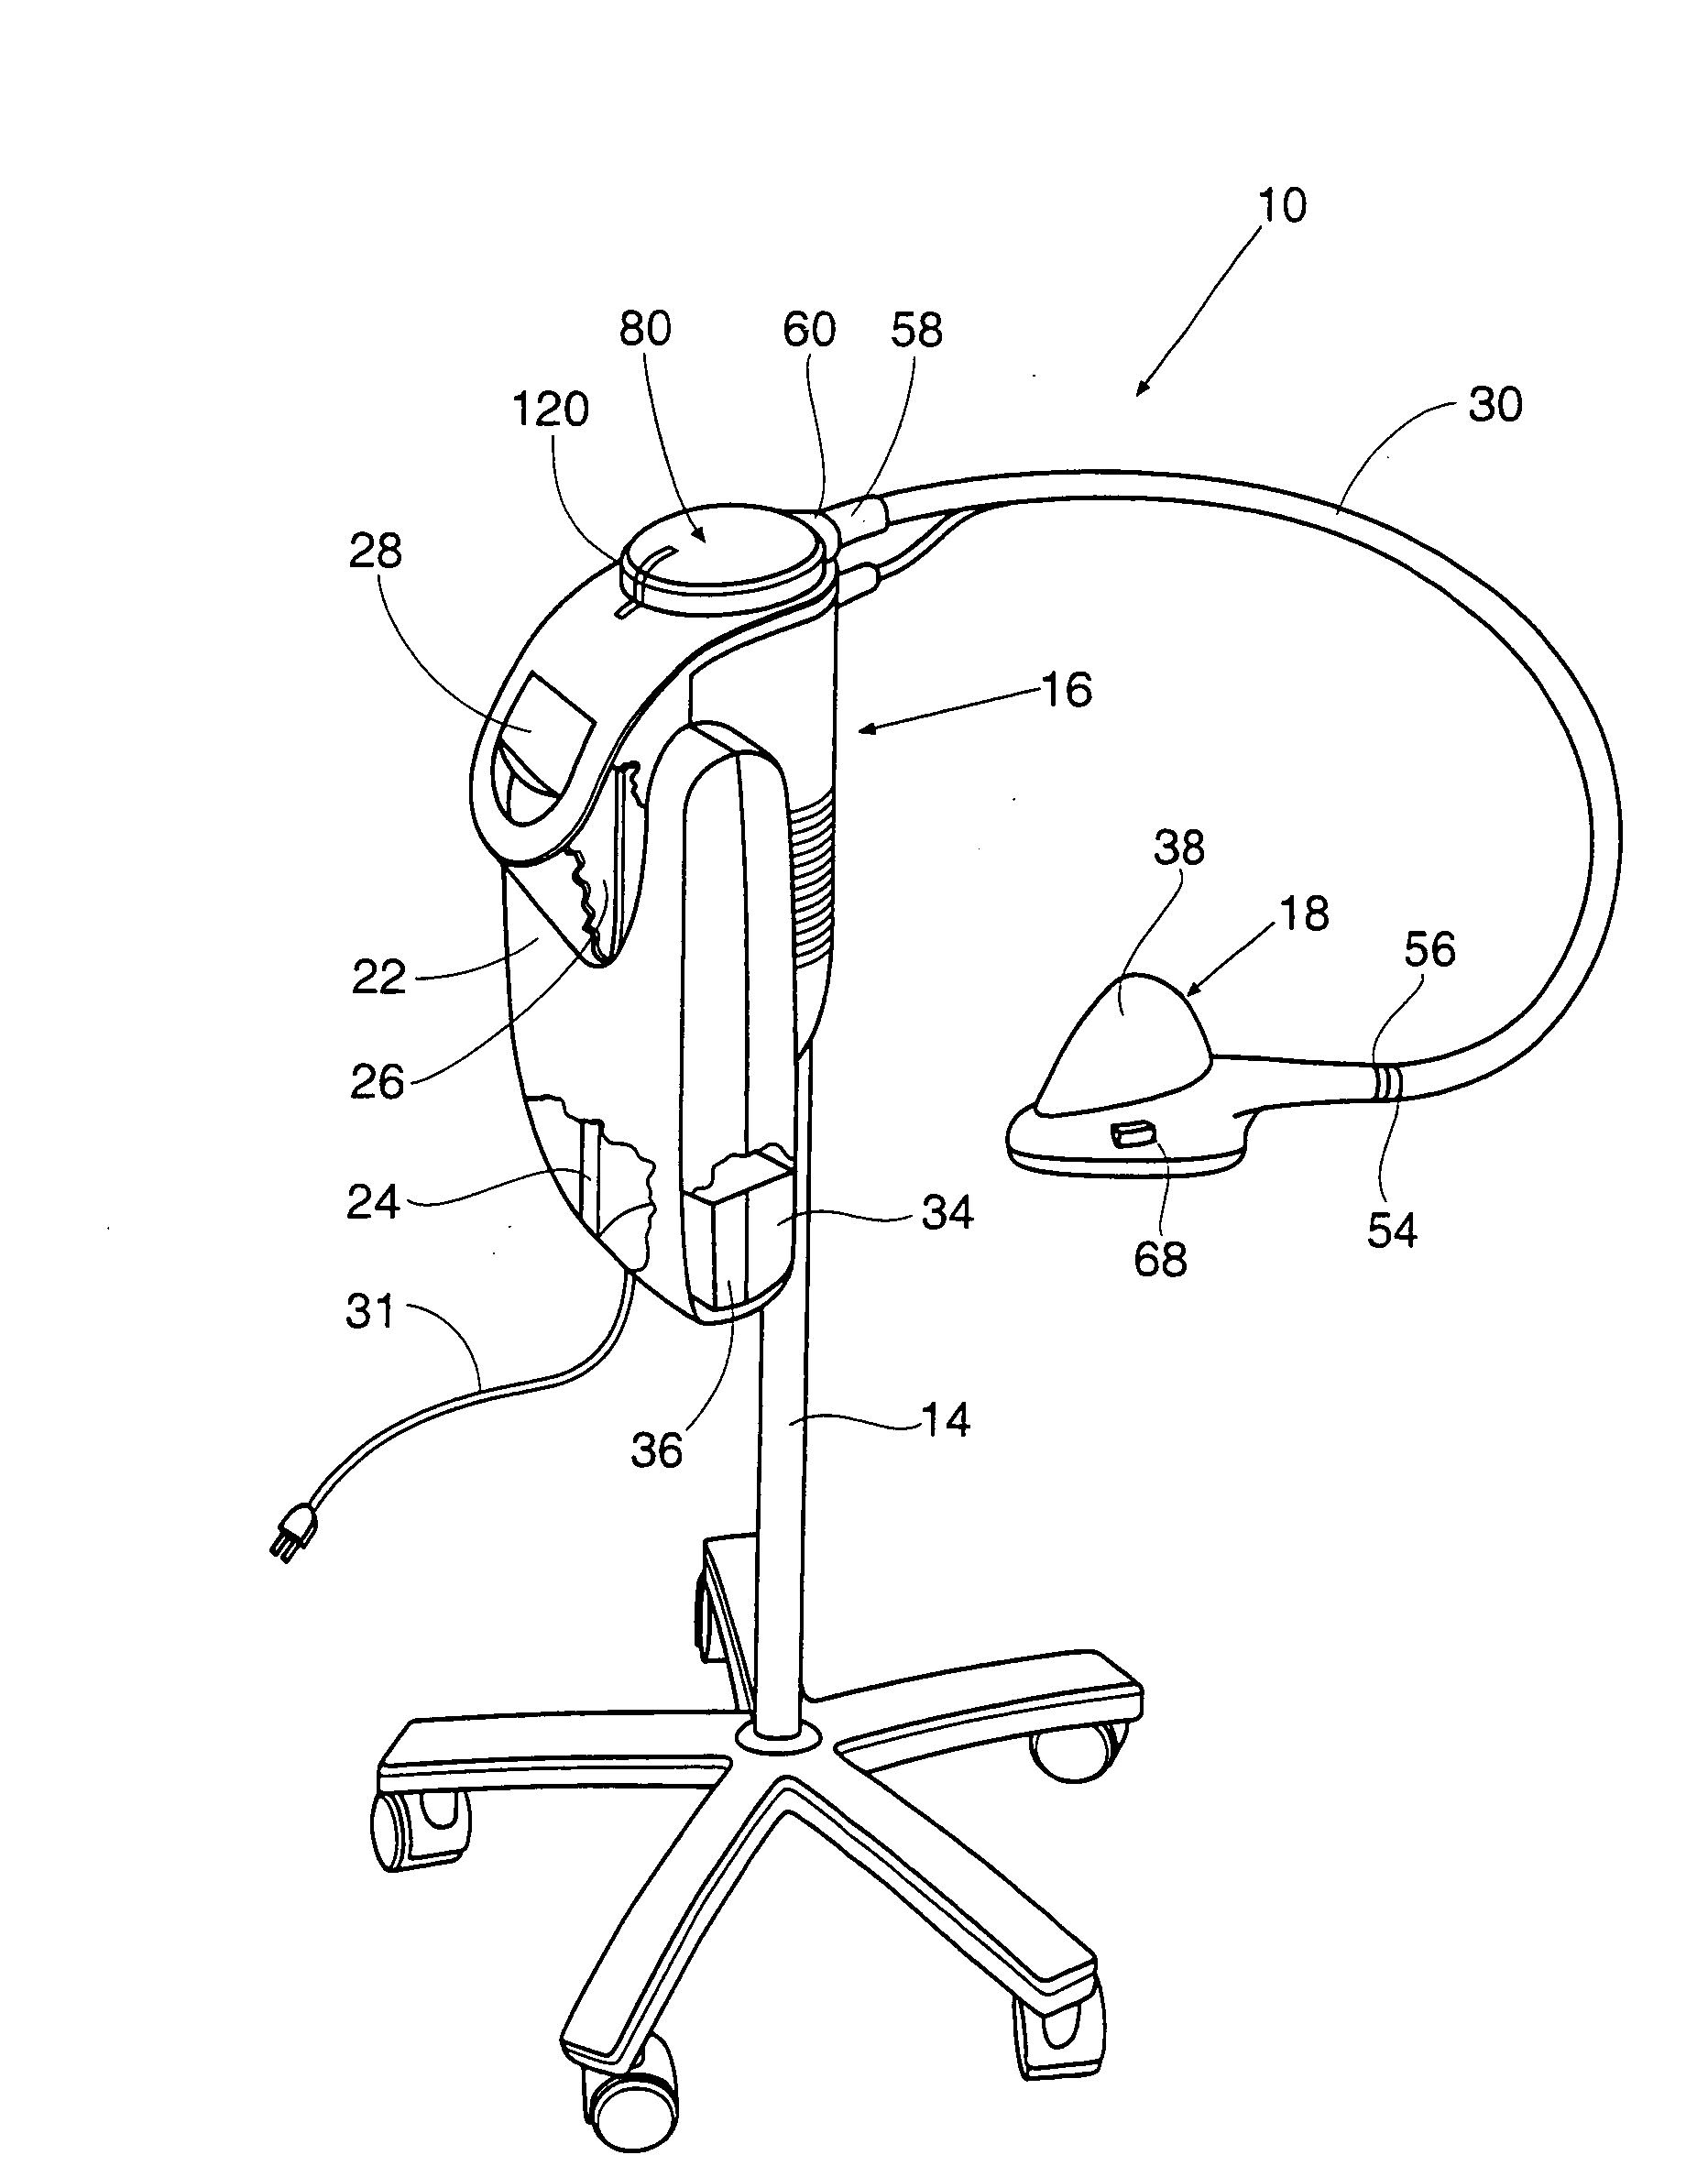 Systems and methods for applying ultrasonic energy to the thoracic cavity